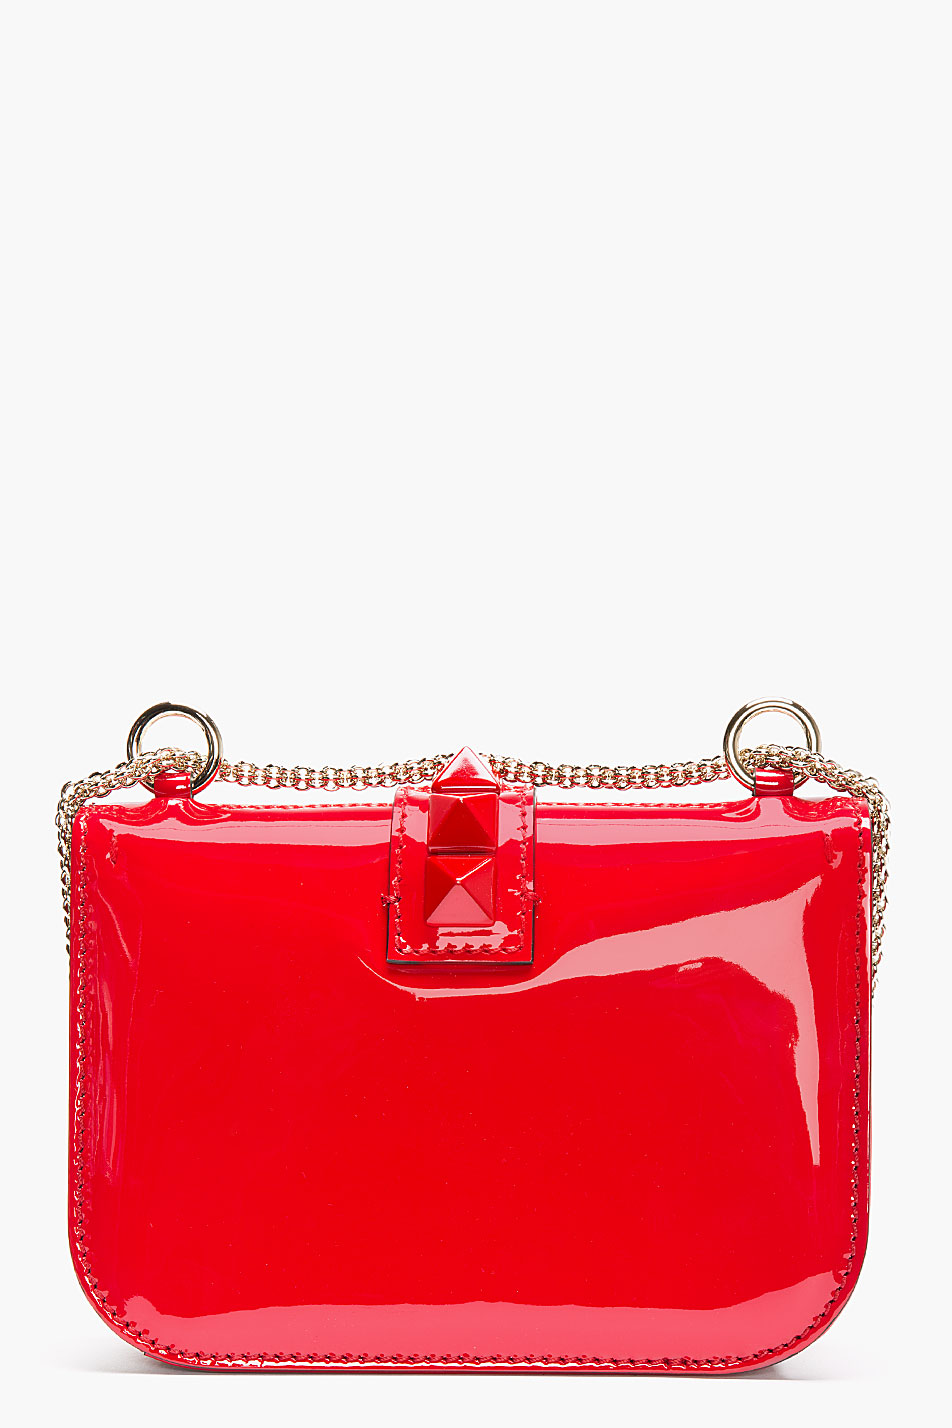 Valentino Red Patent Leather Studded Punkouture Shoulder Bag - Lyst